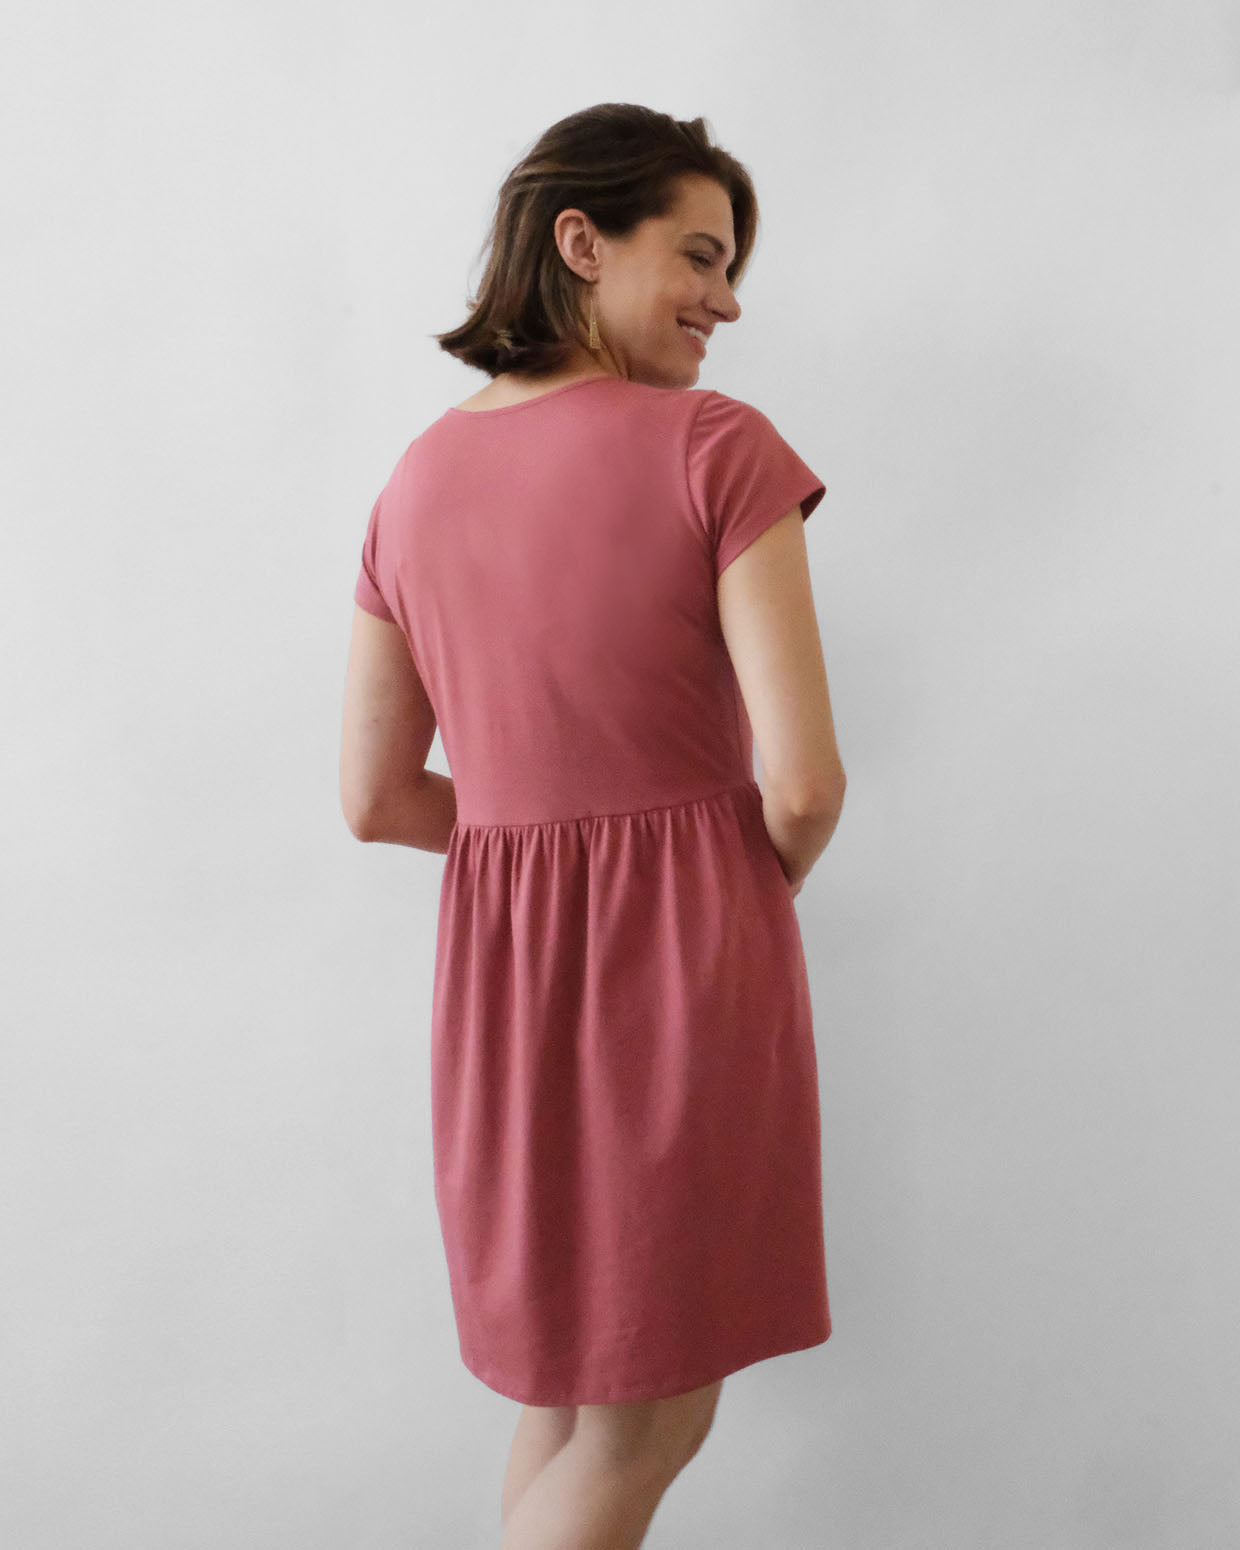 FLEUR dress in Withered Rose